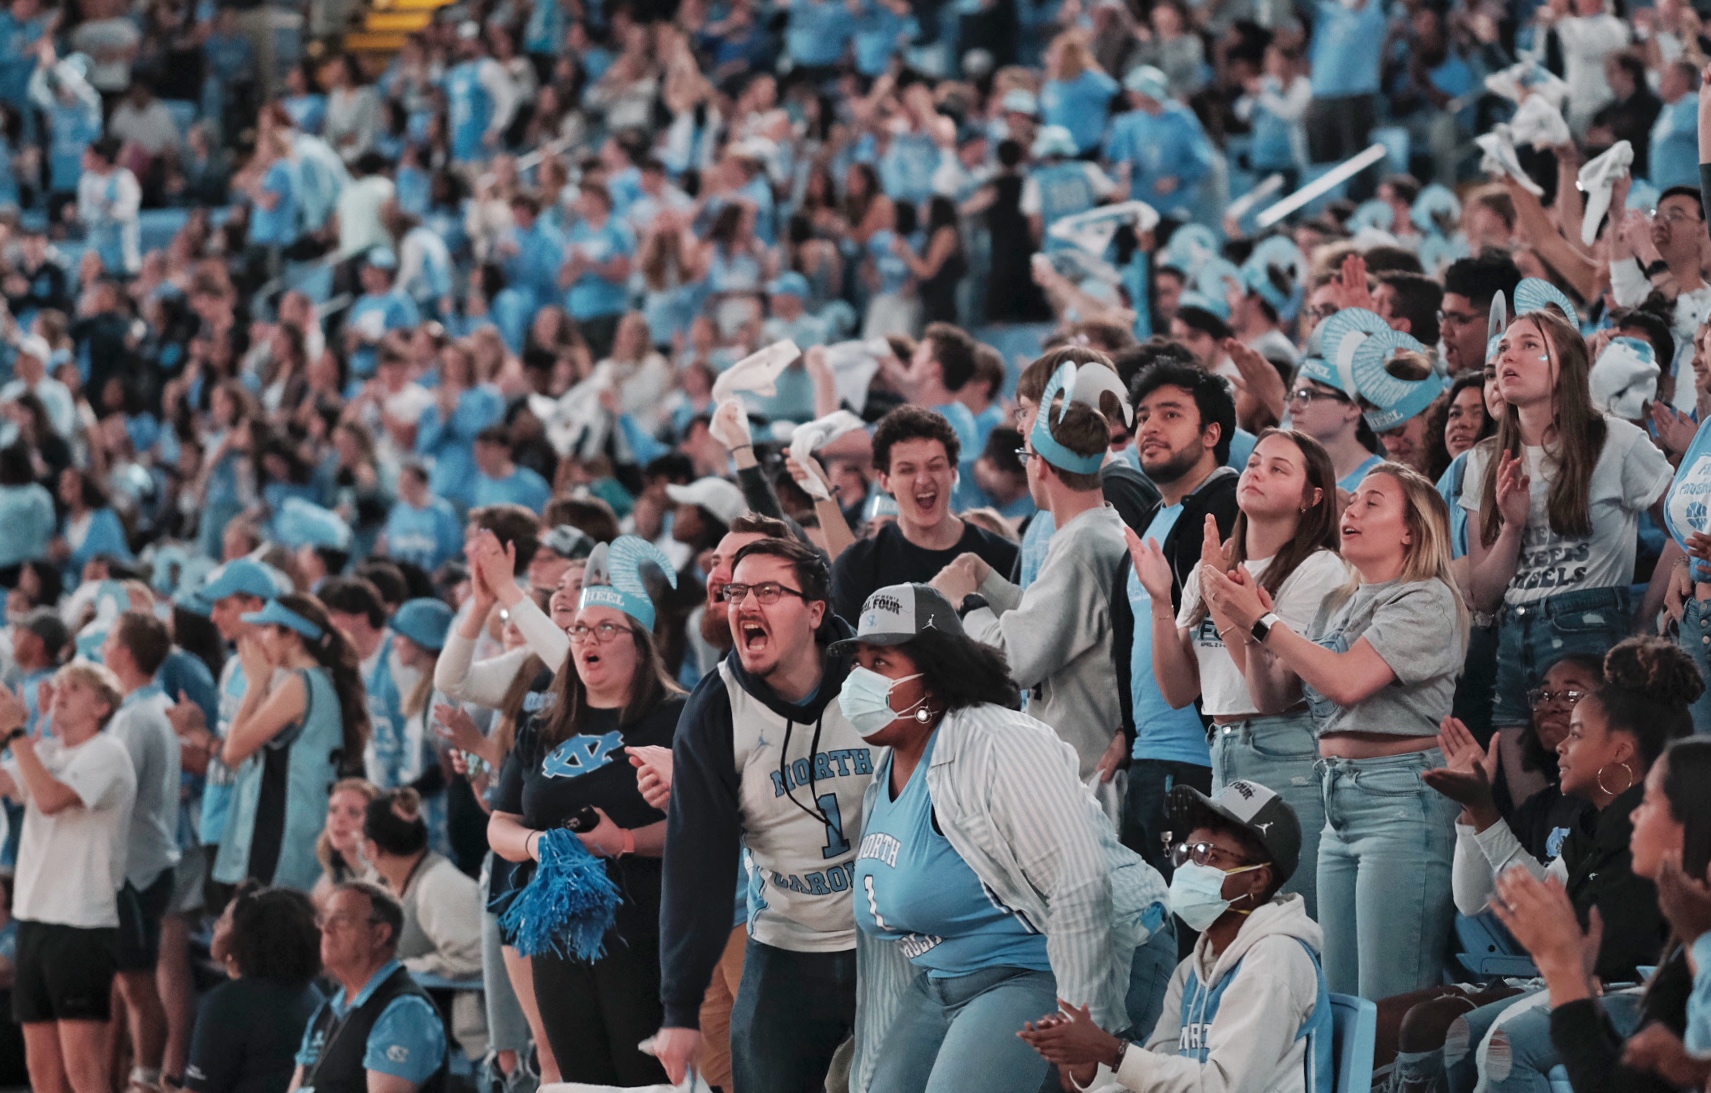 Fans in the Smith Center cheering the Tar Heels